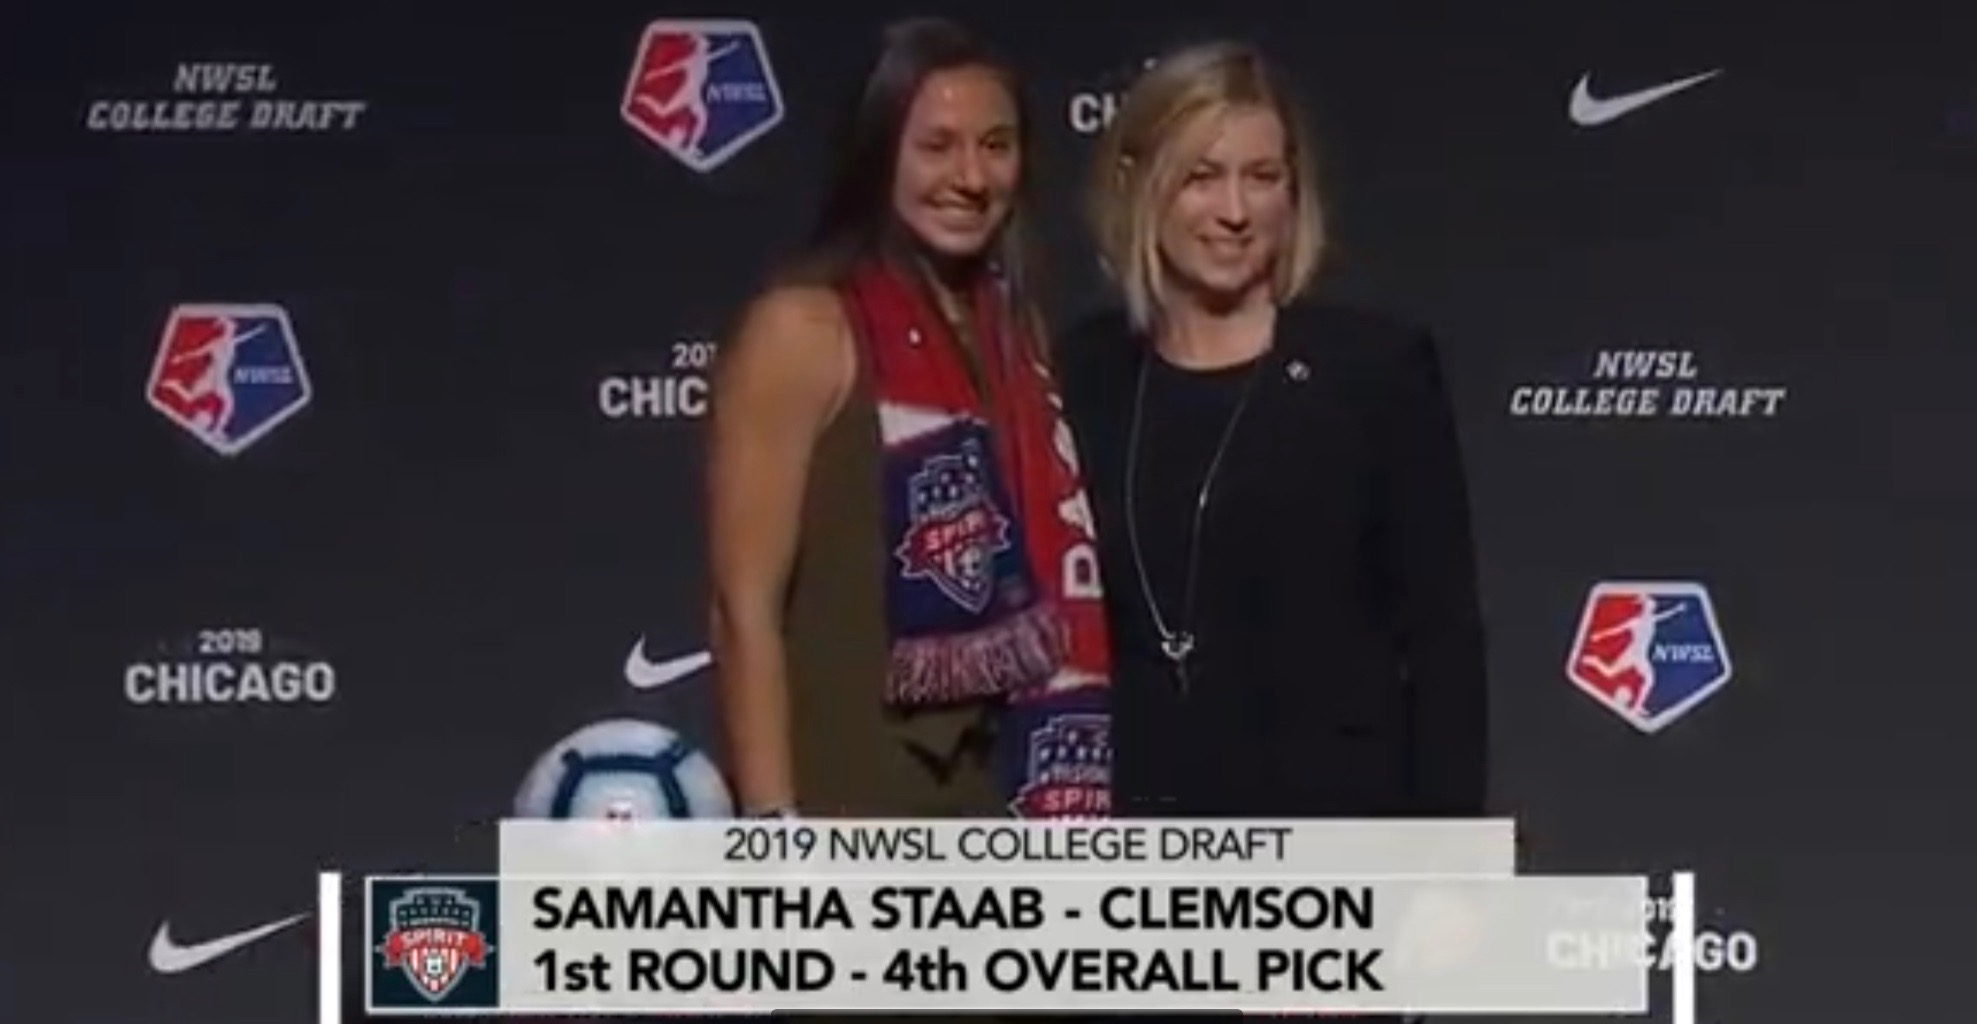 San Diego Homegrown Going Pro: Sam Staab drafted #4 in NWSL 2019 Draft